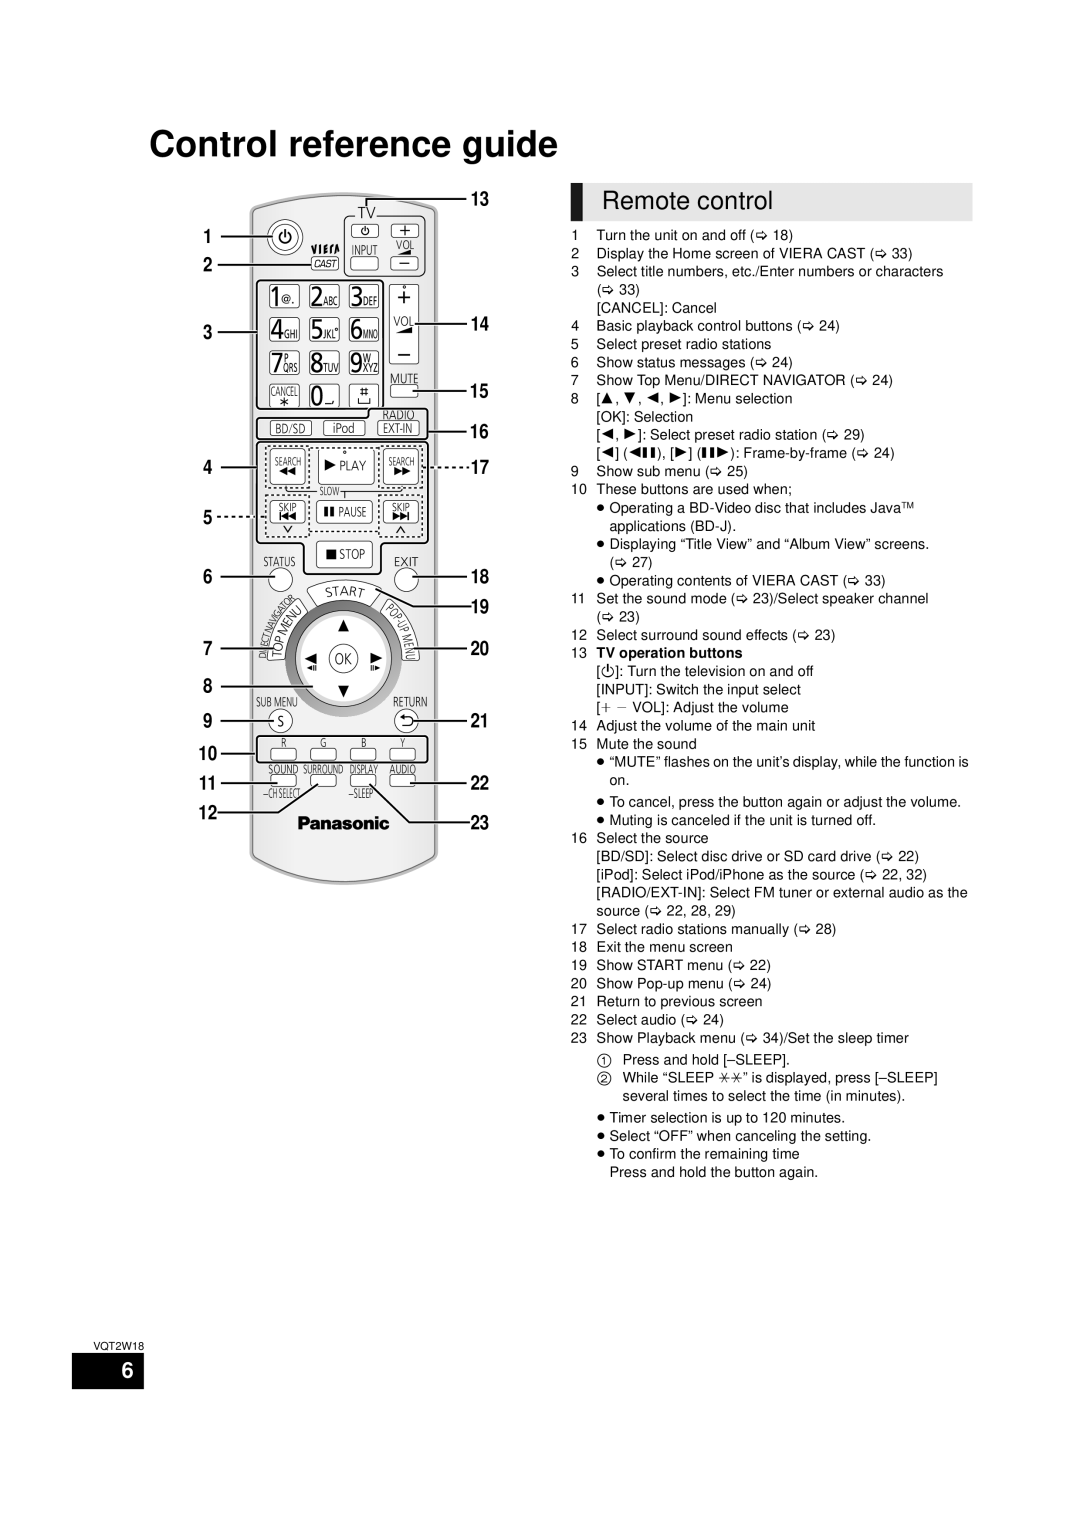 Panasonic SC-BTT750 warranty Control reference guide, Remote control, 1 2 3 4 5 6 7 8, 22 23, 10 11 12 